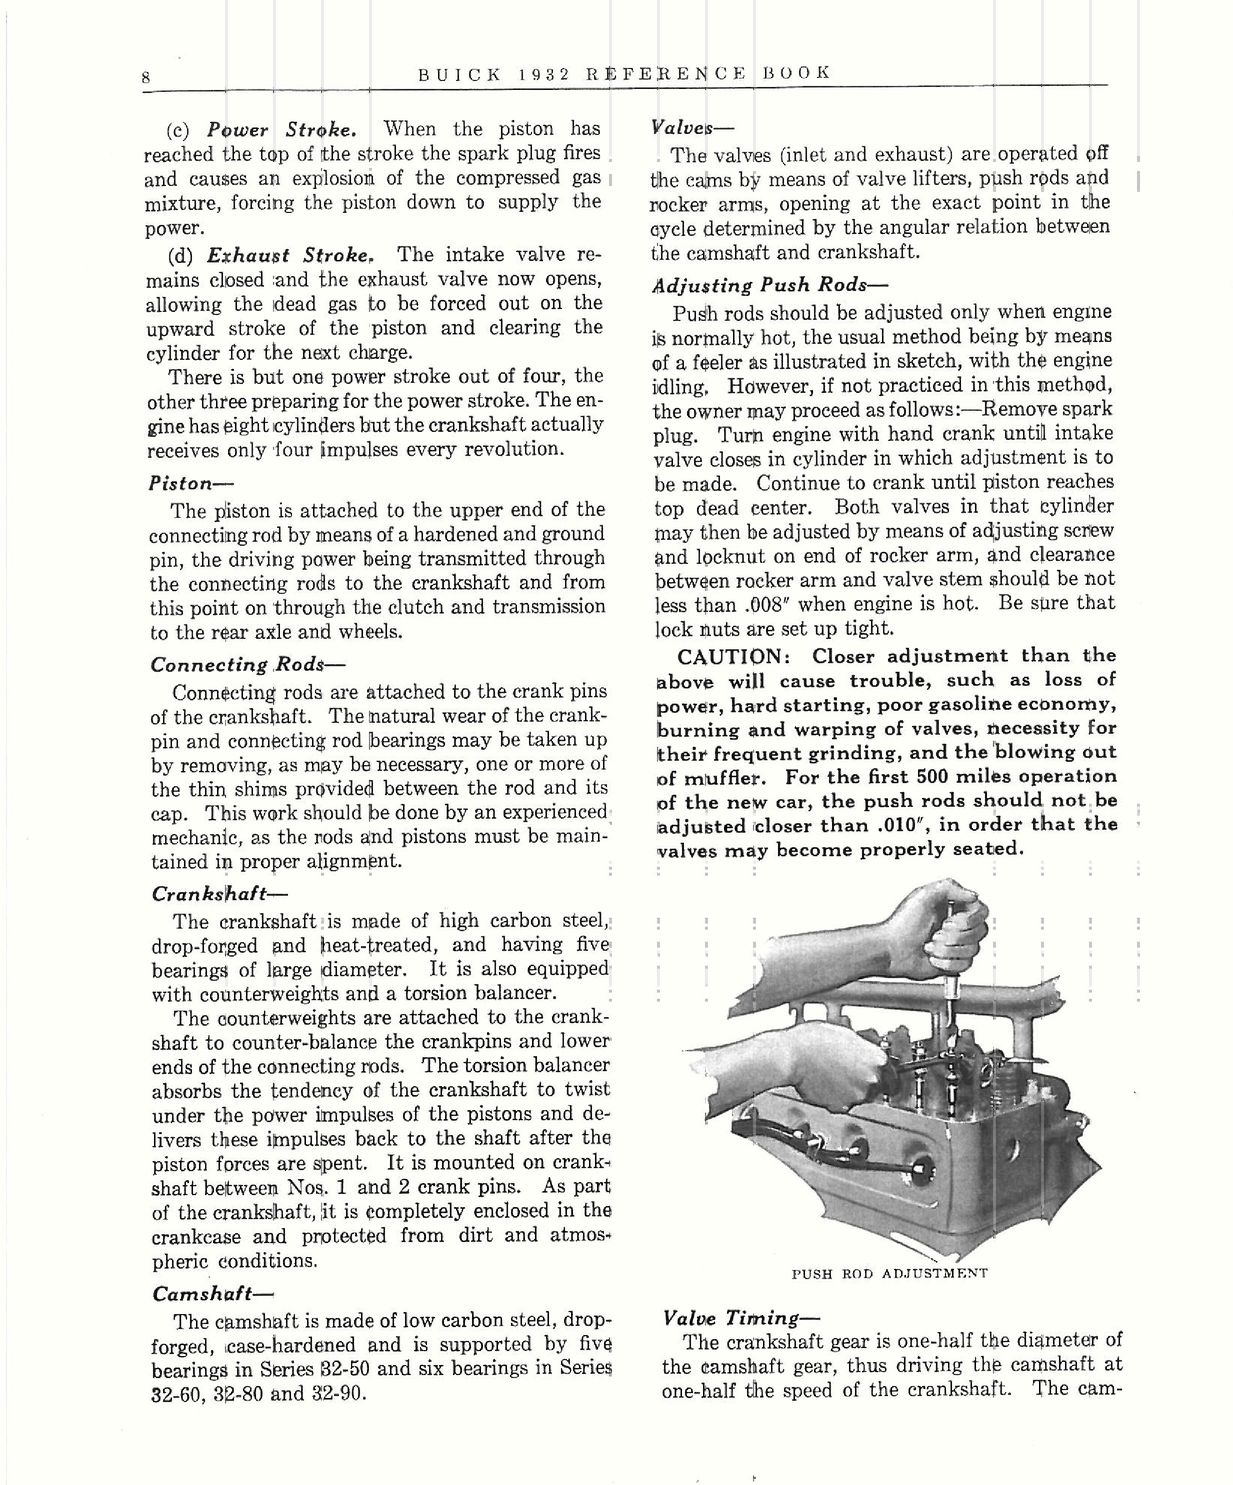 n_1932 Buick Reference Book-08.jpg